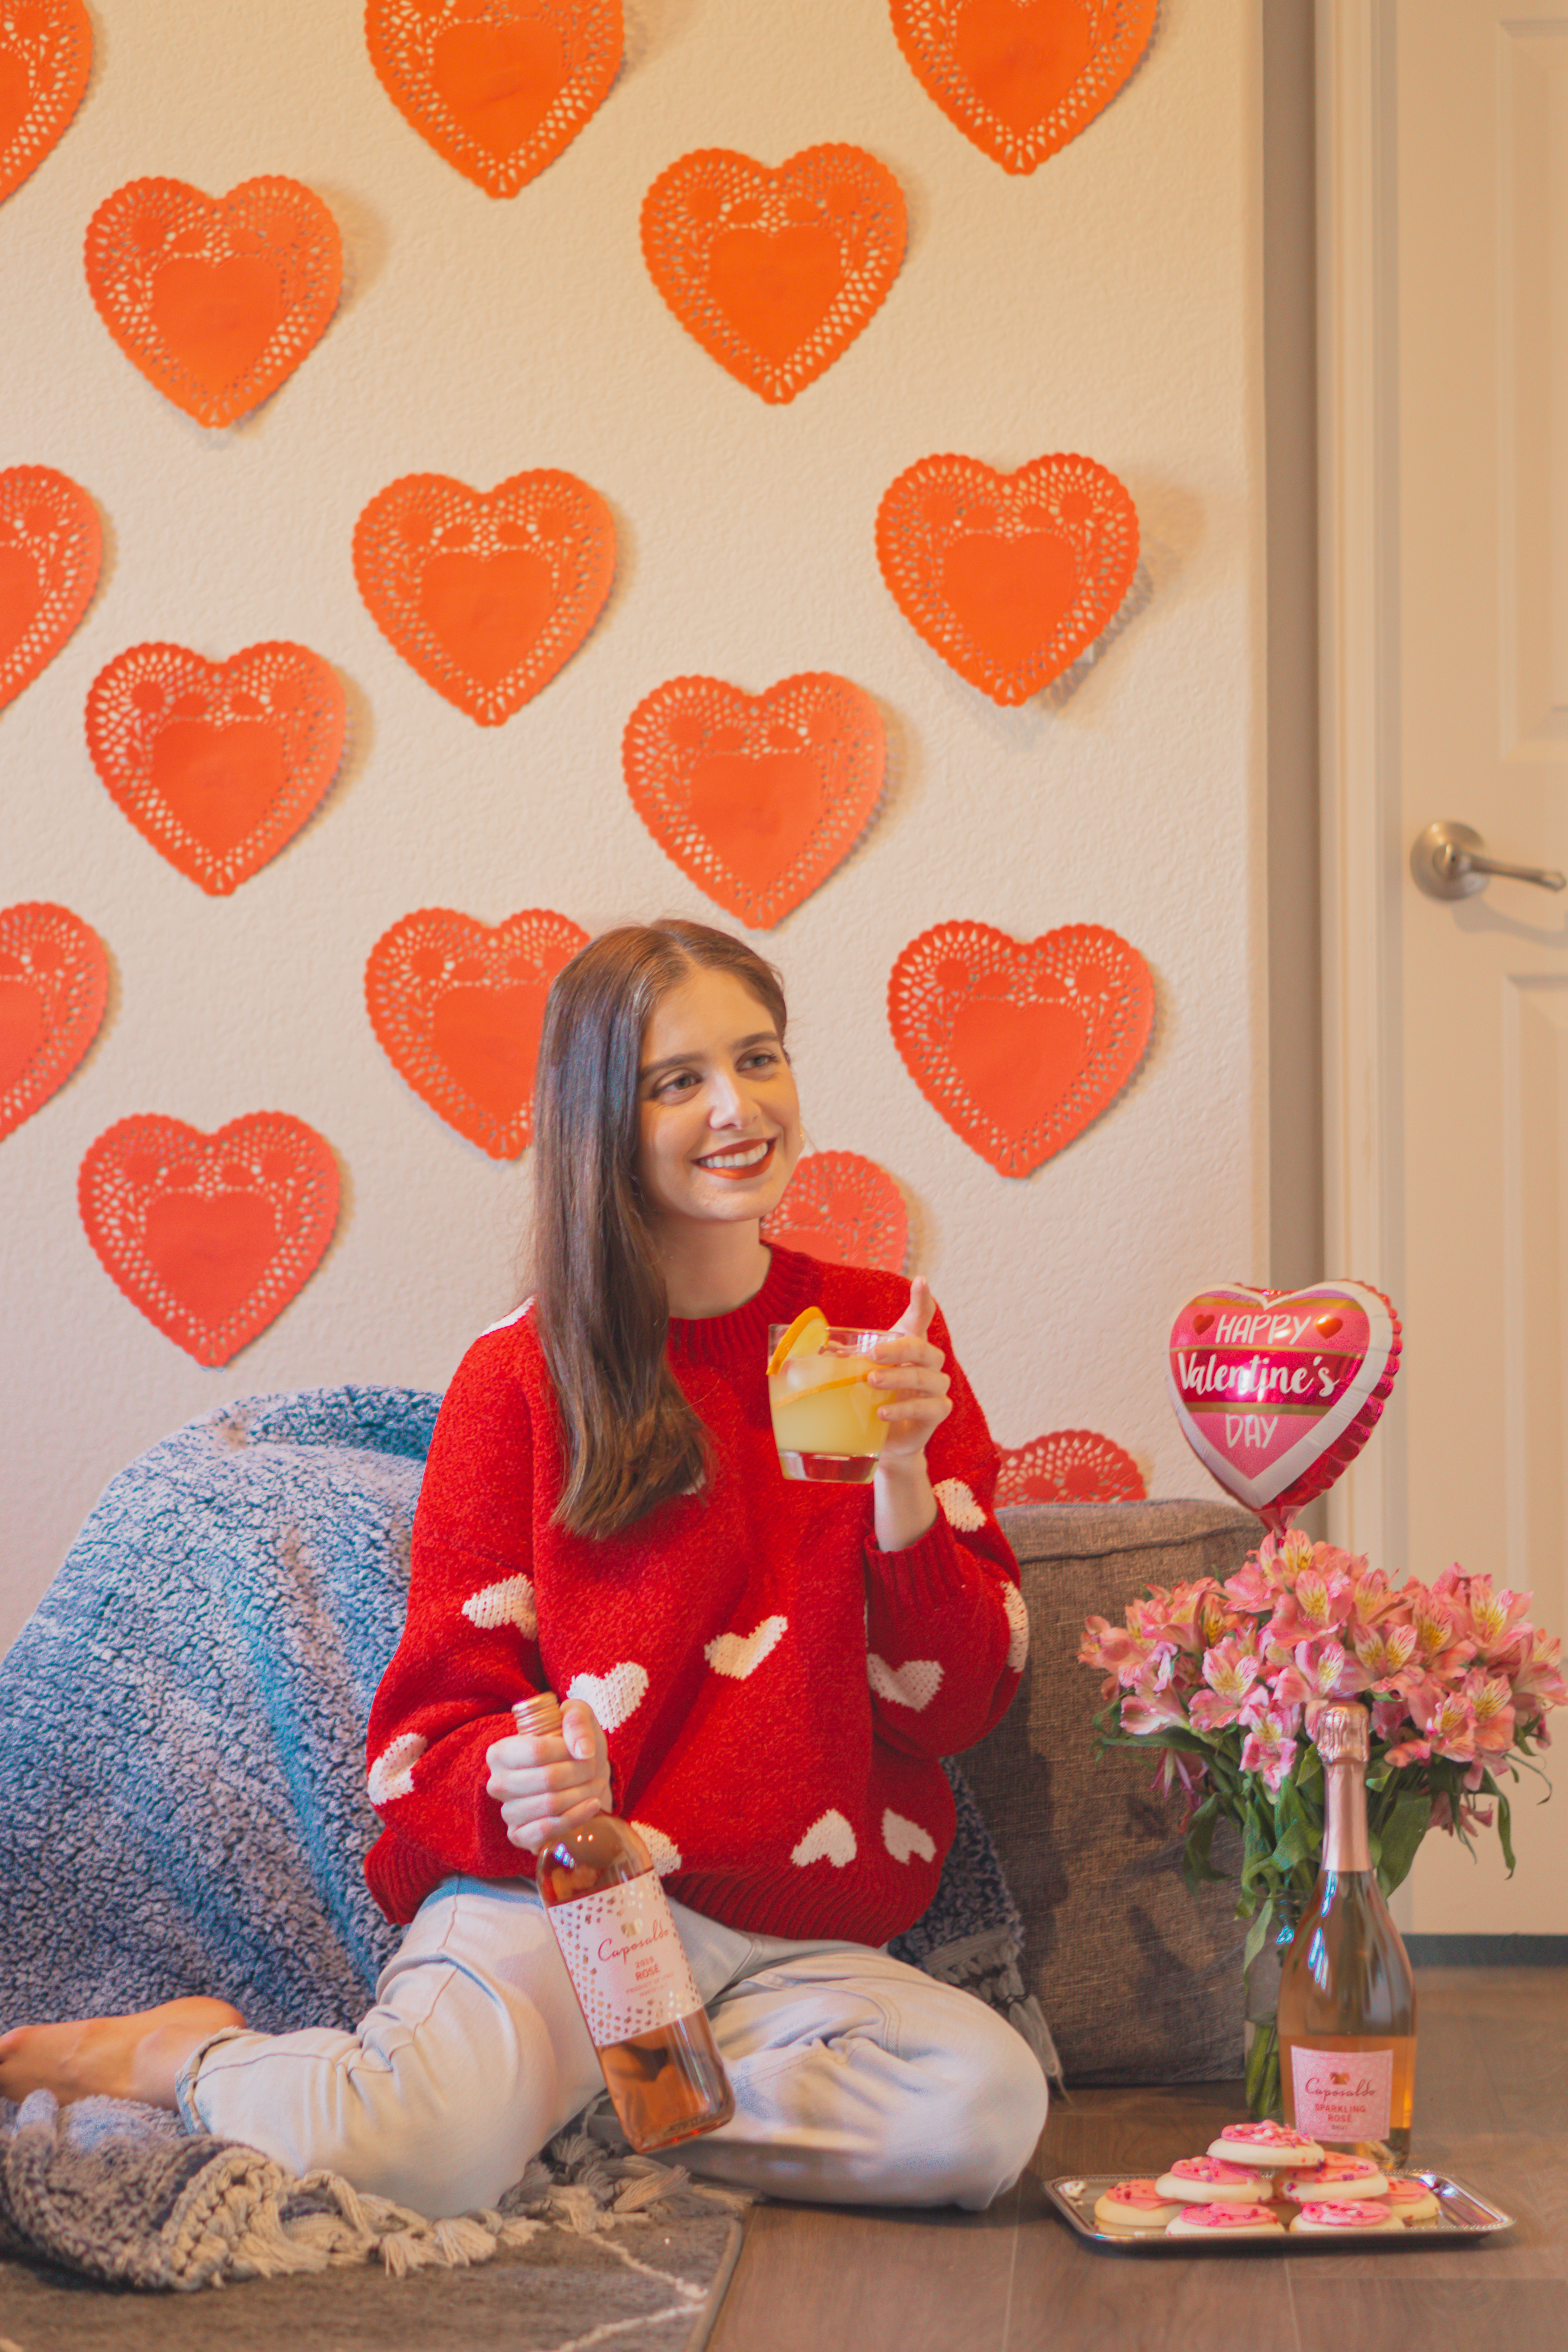 How to Host the Perfect Galentine’s Day ft. Caposaldo Wine